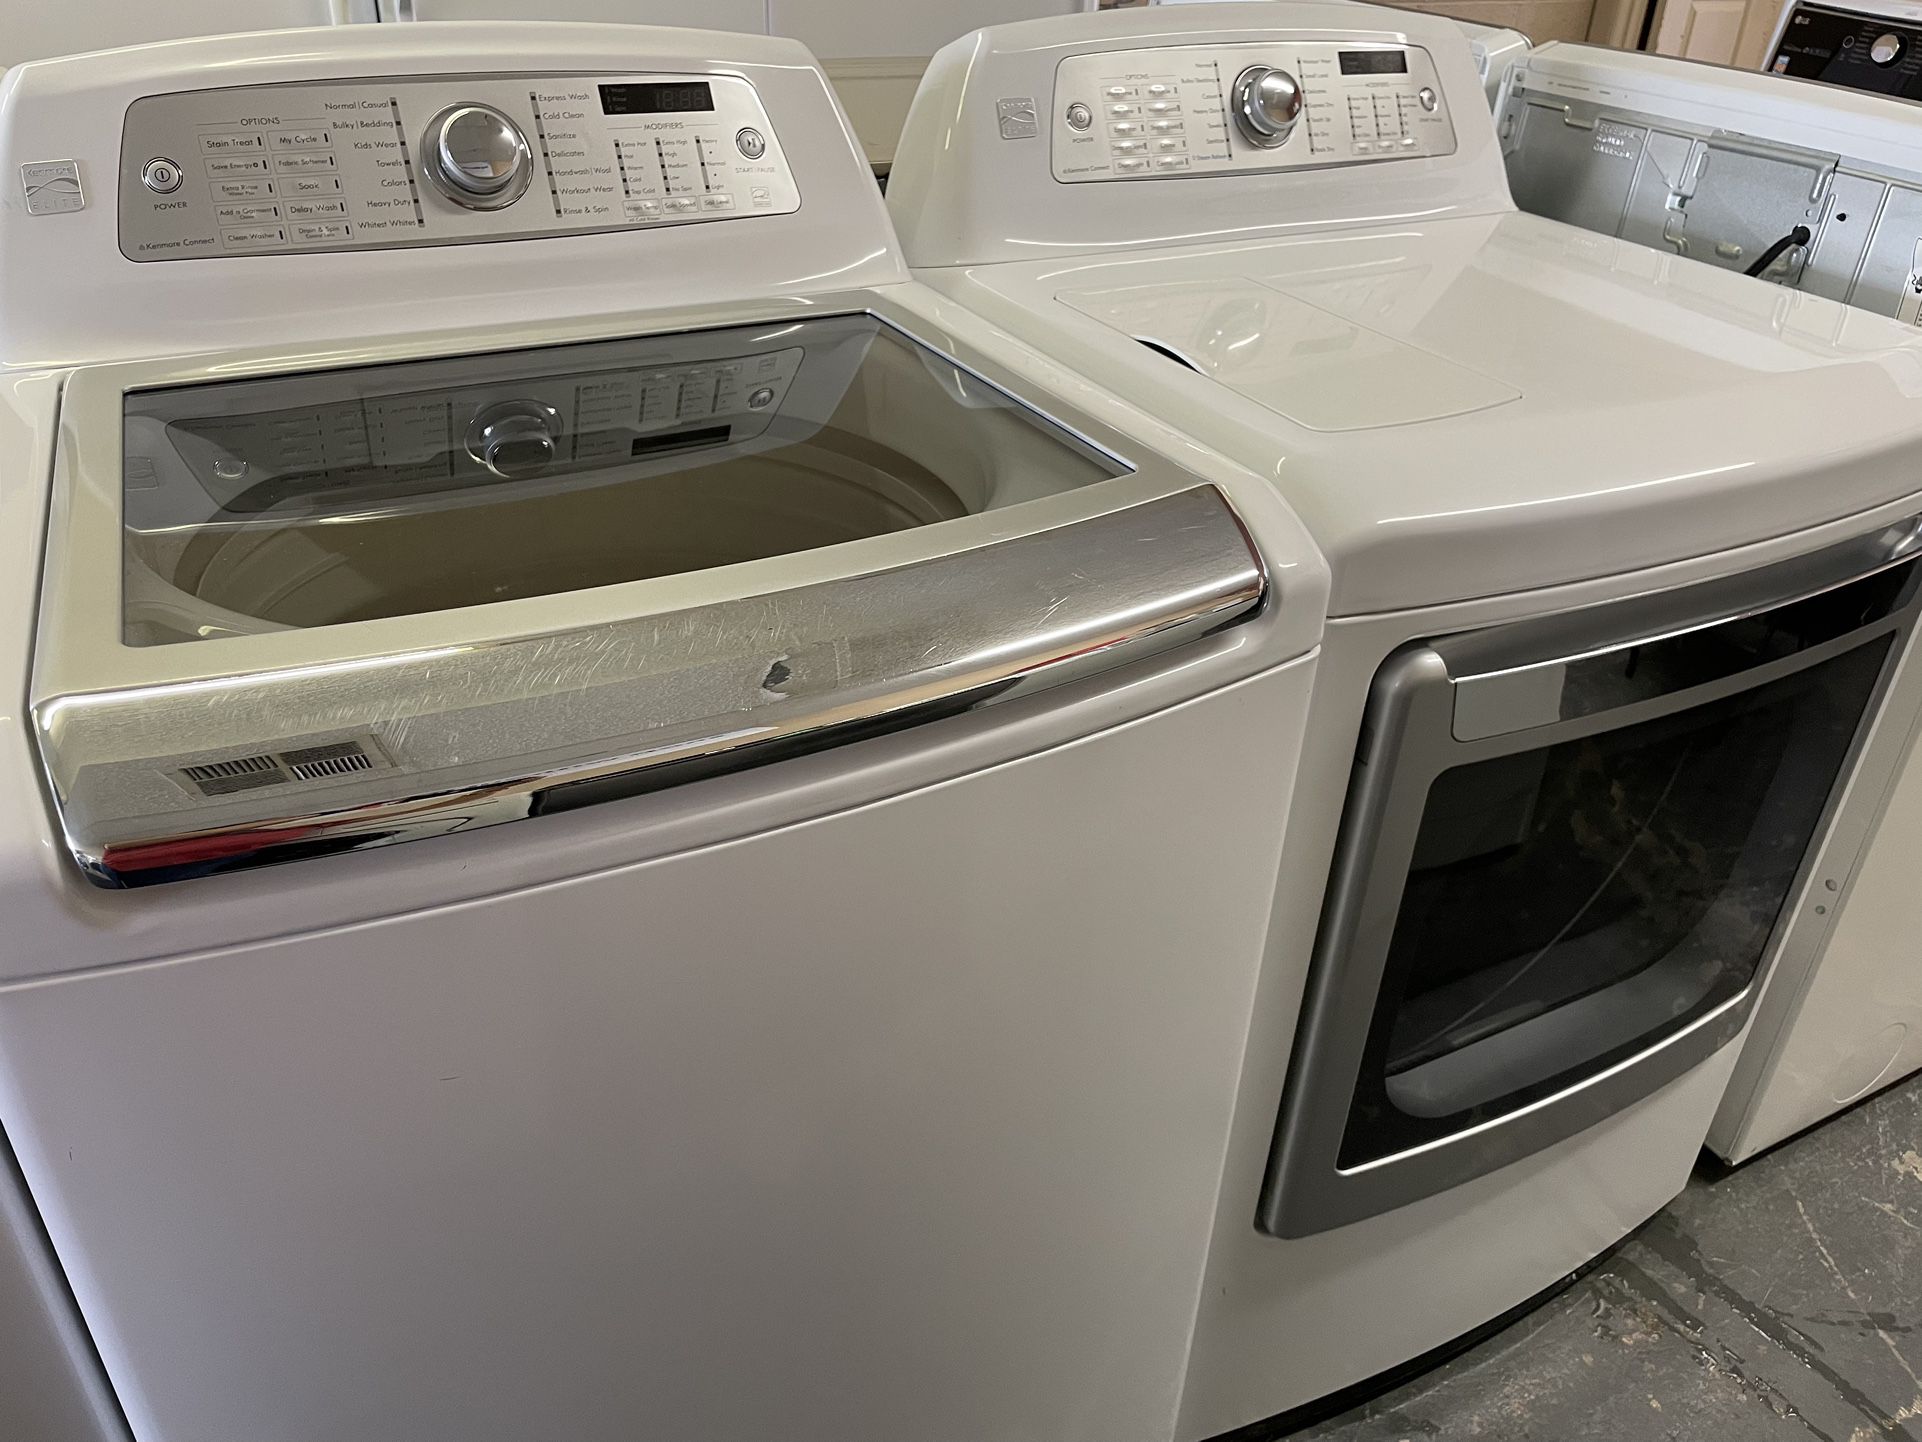 Kenmore* Elite 4.7cu.ft Top Load Washer and 7.4cu.ft Gas Dryer Set 